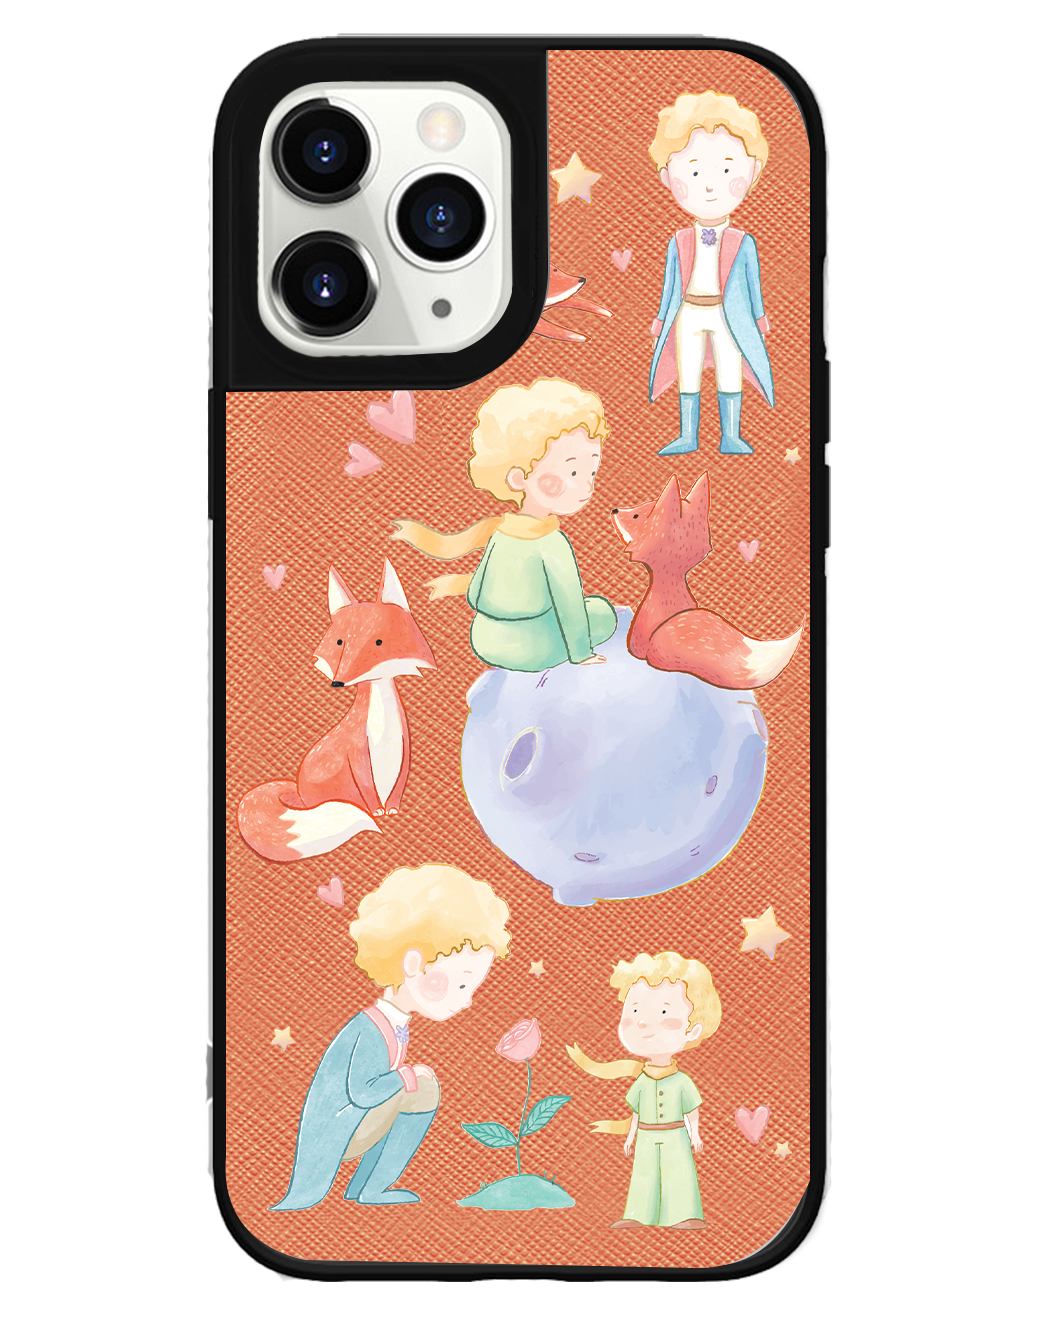 iPhone Leather Grip Case - Little Prince & Fox